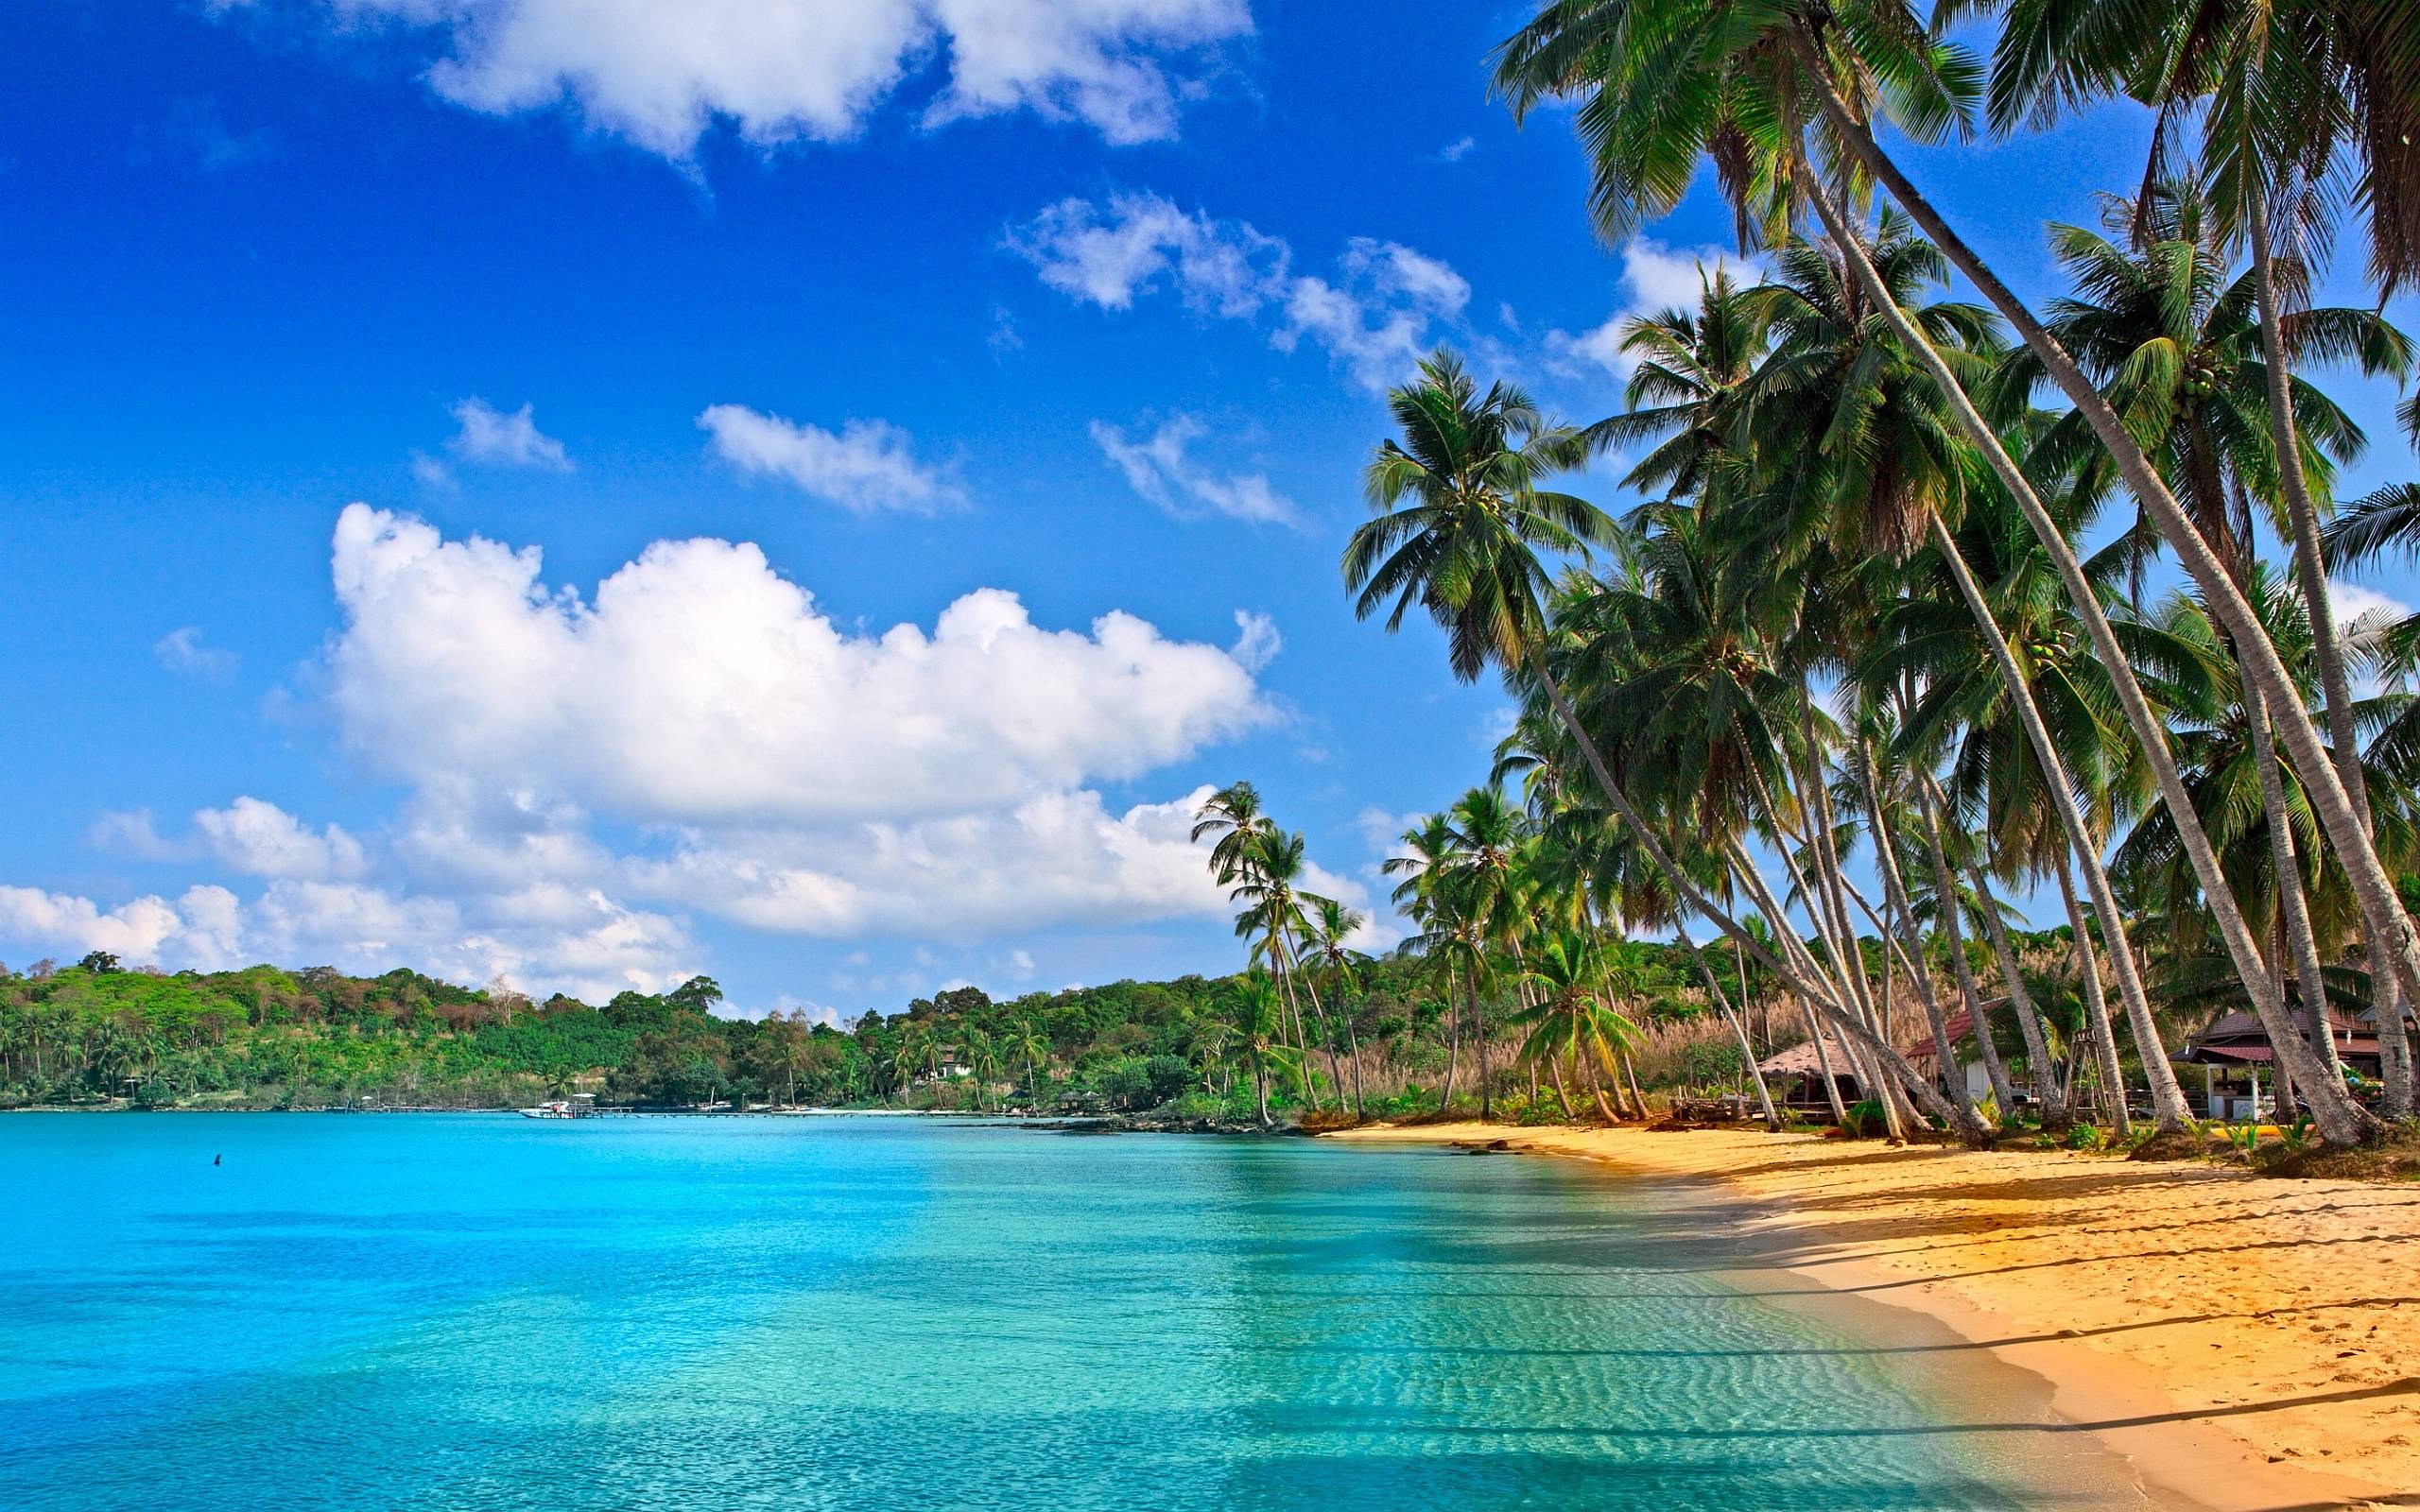 Tropical HD Wallpapers